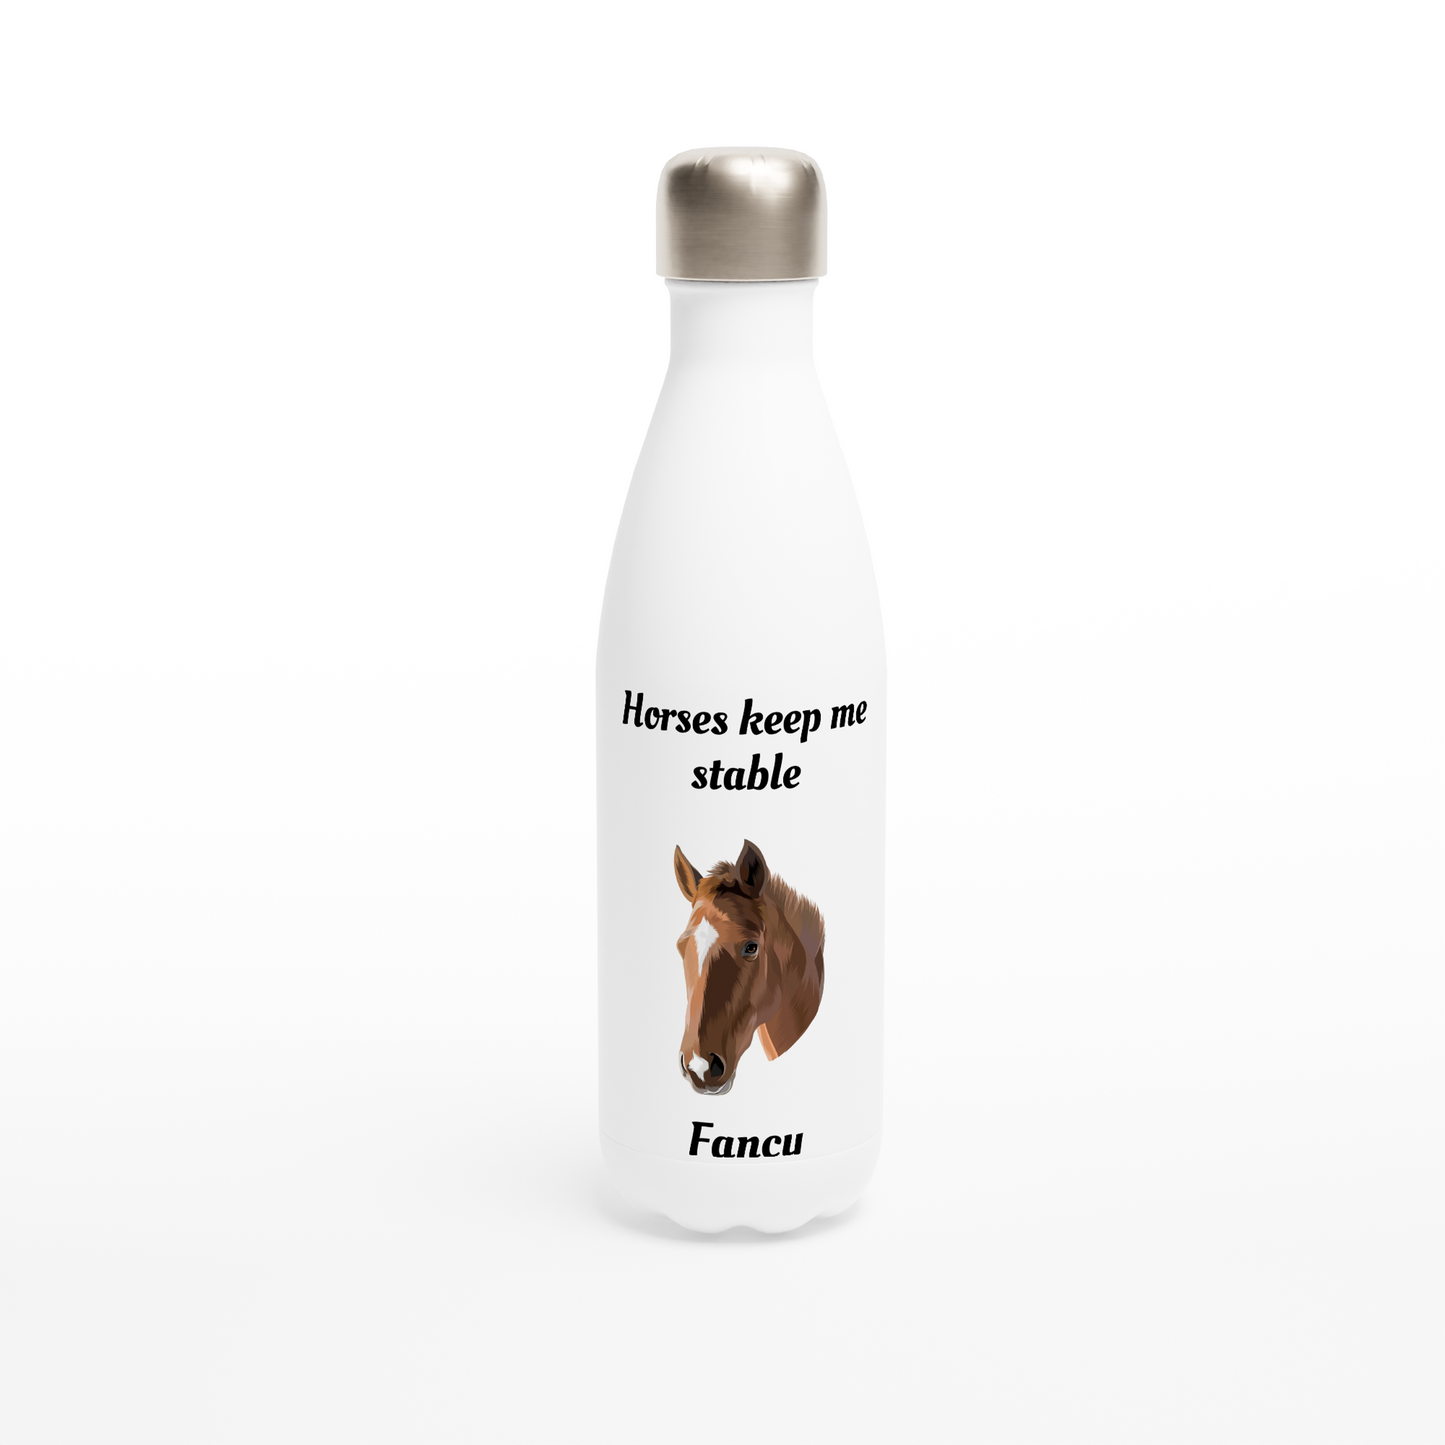 Hand Drawn Horse || 17oz Stainless Steel Water Bottle  TruPaint  Hand Drawn & Personalized; Hand drawn & personalized with your horse